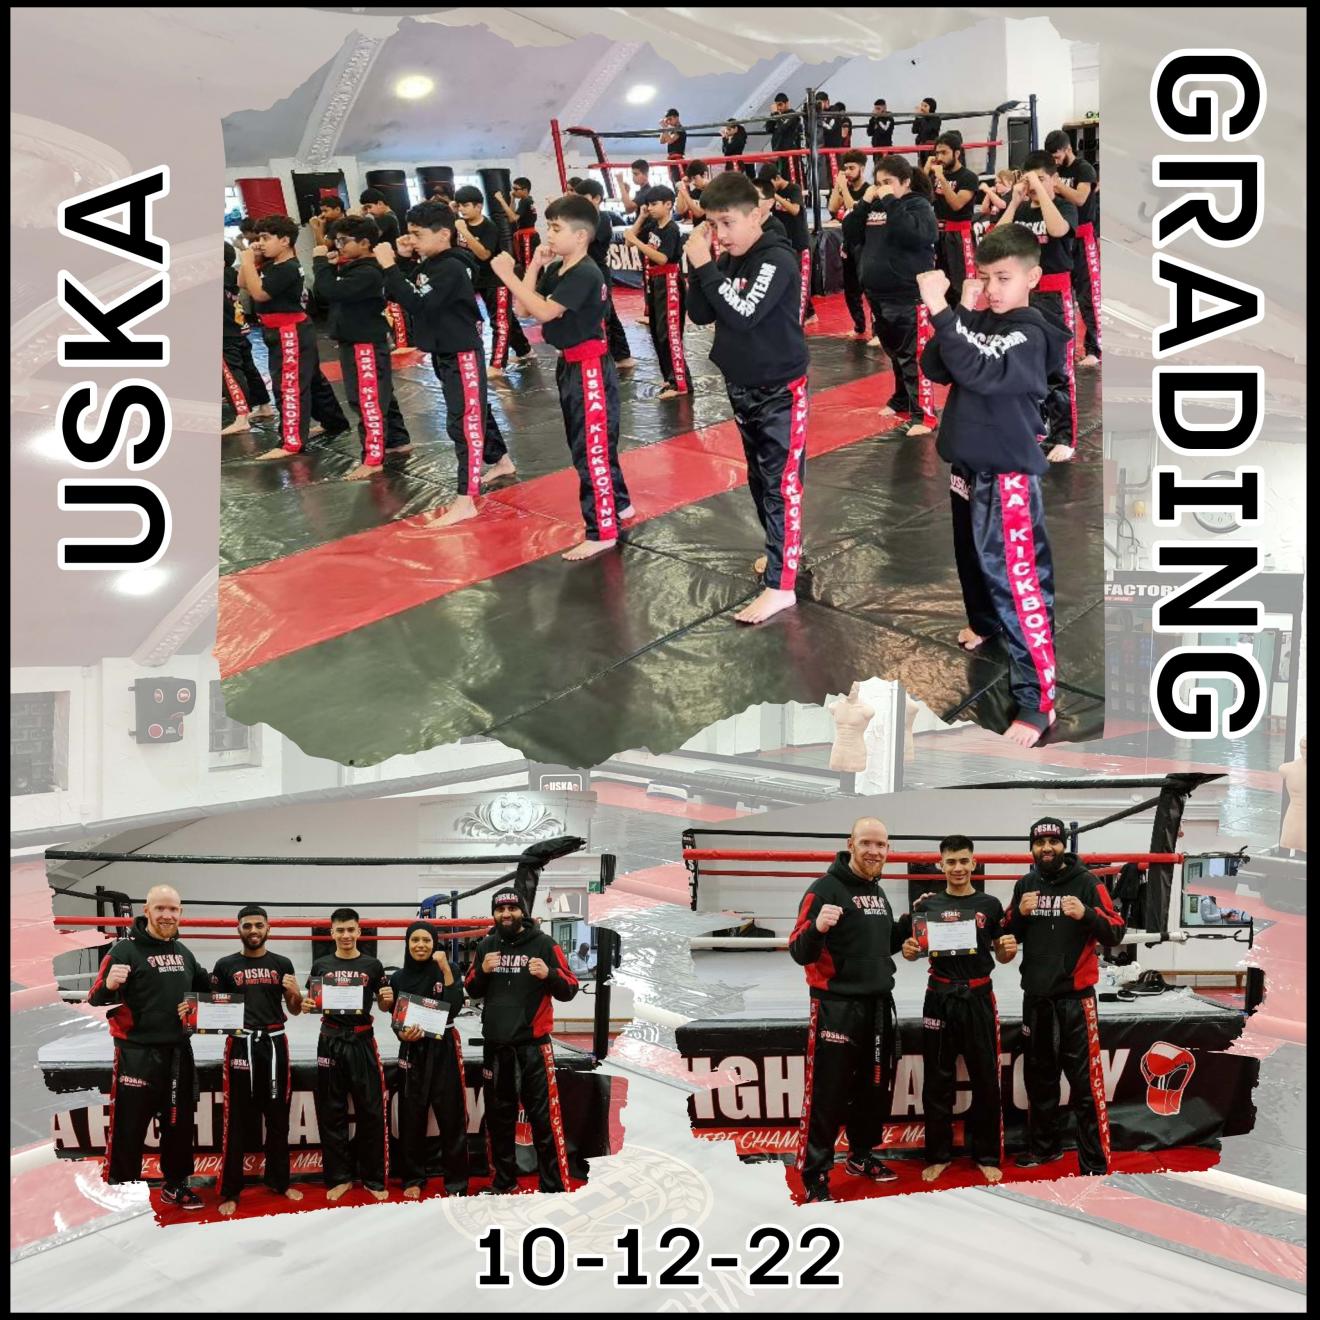 10-12-22 - From Red Belt to Black Belt congratulations to all of todays successful Graders